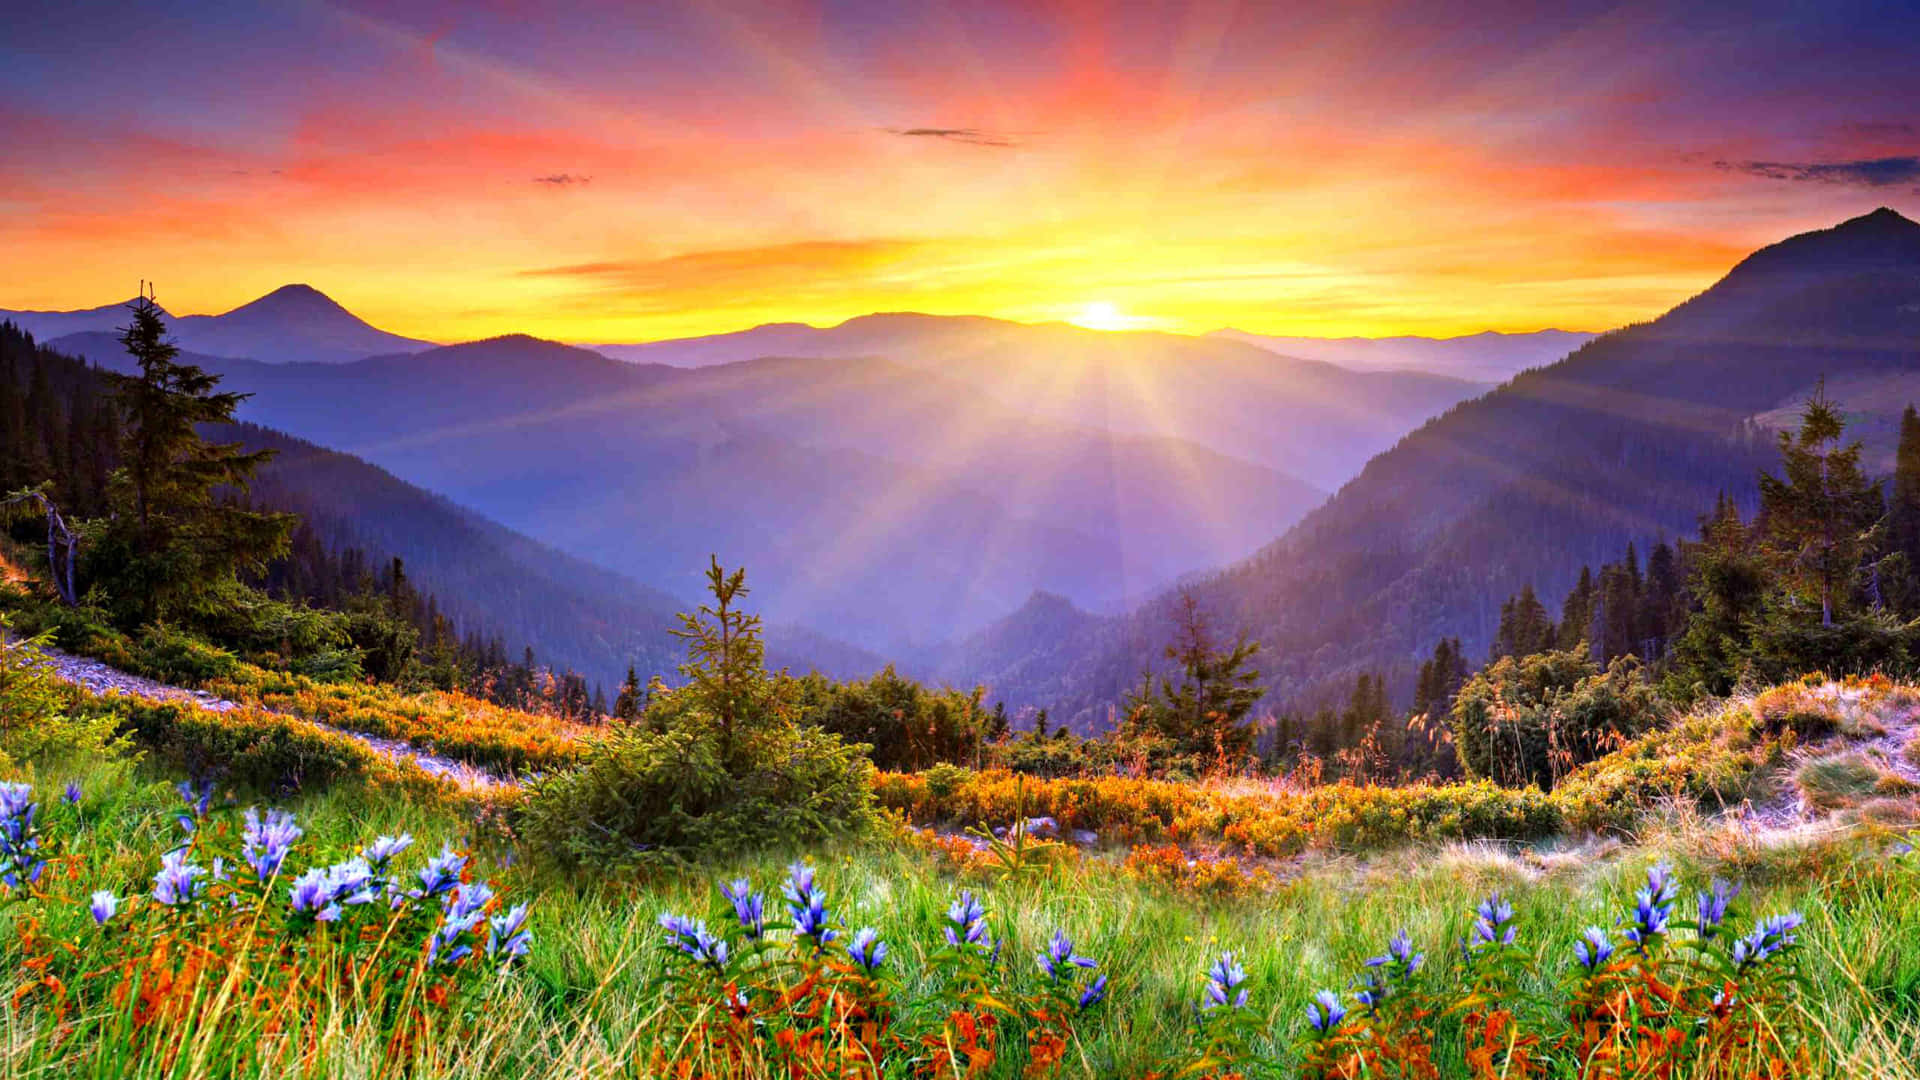 A Mountain With Flowers Wallpaper